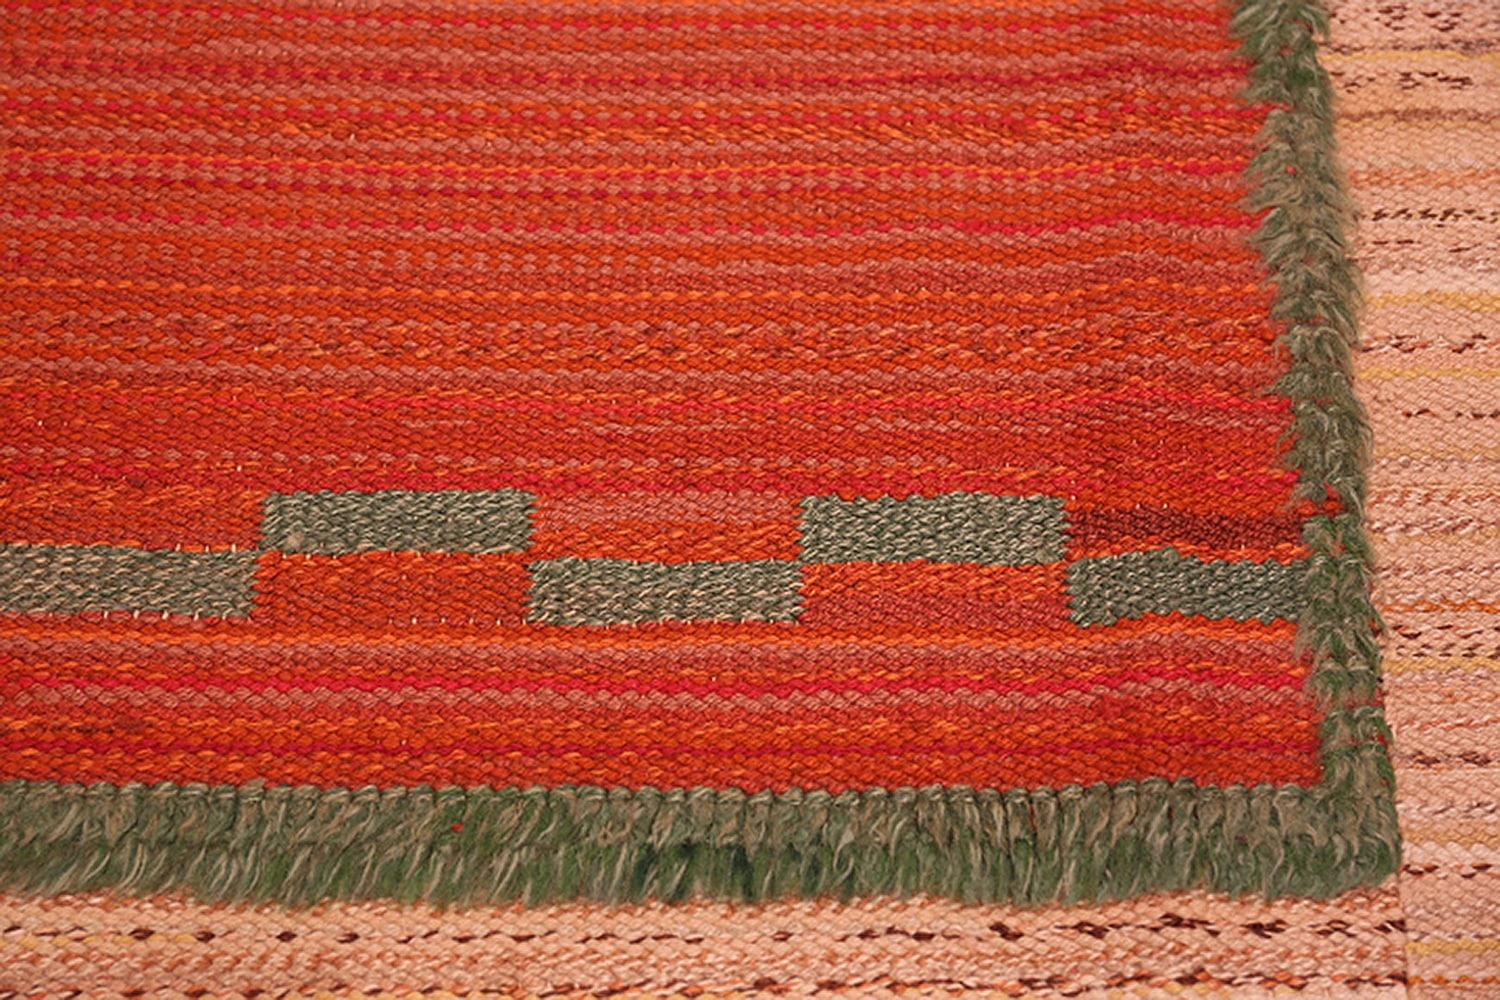 Hand-Woven Vintage Scandinavian Swedish Kilim. Size: 7 ft 10 in x 12 ft For Sale